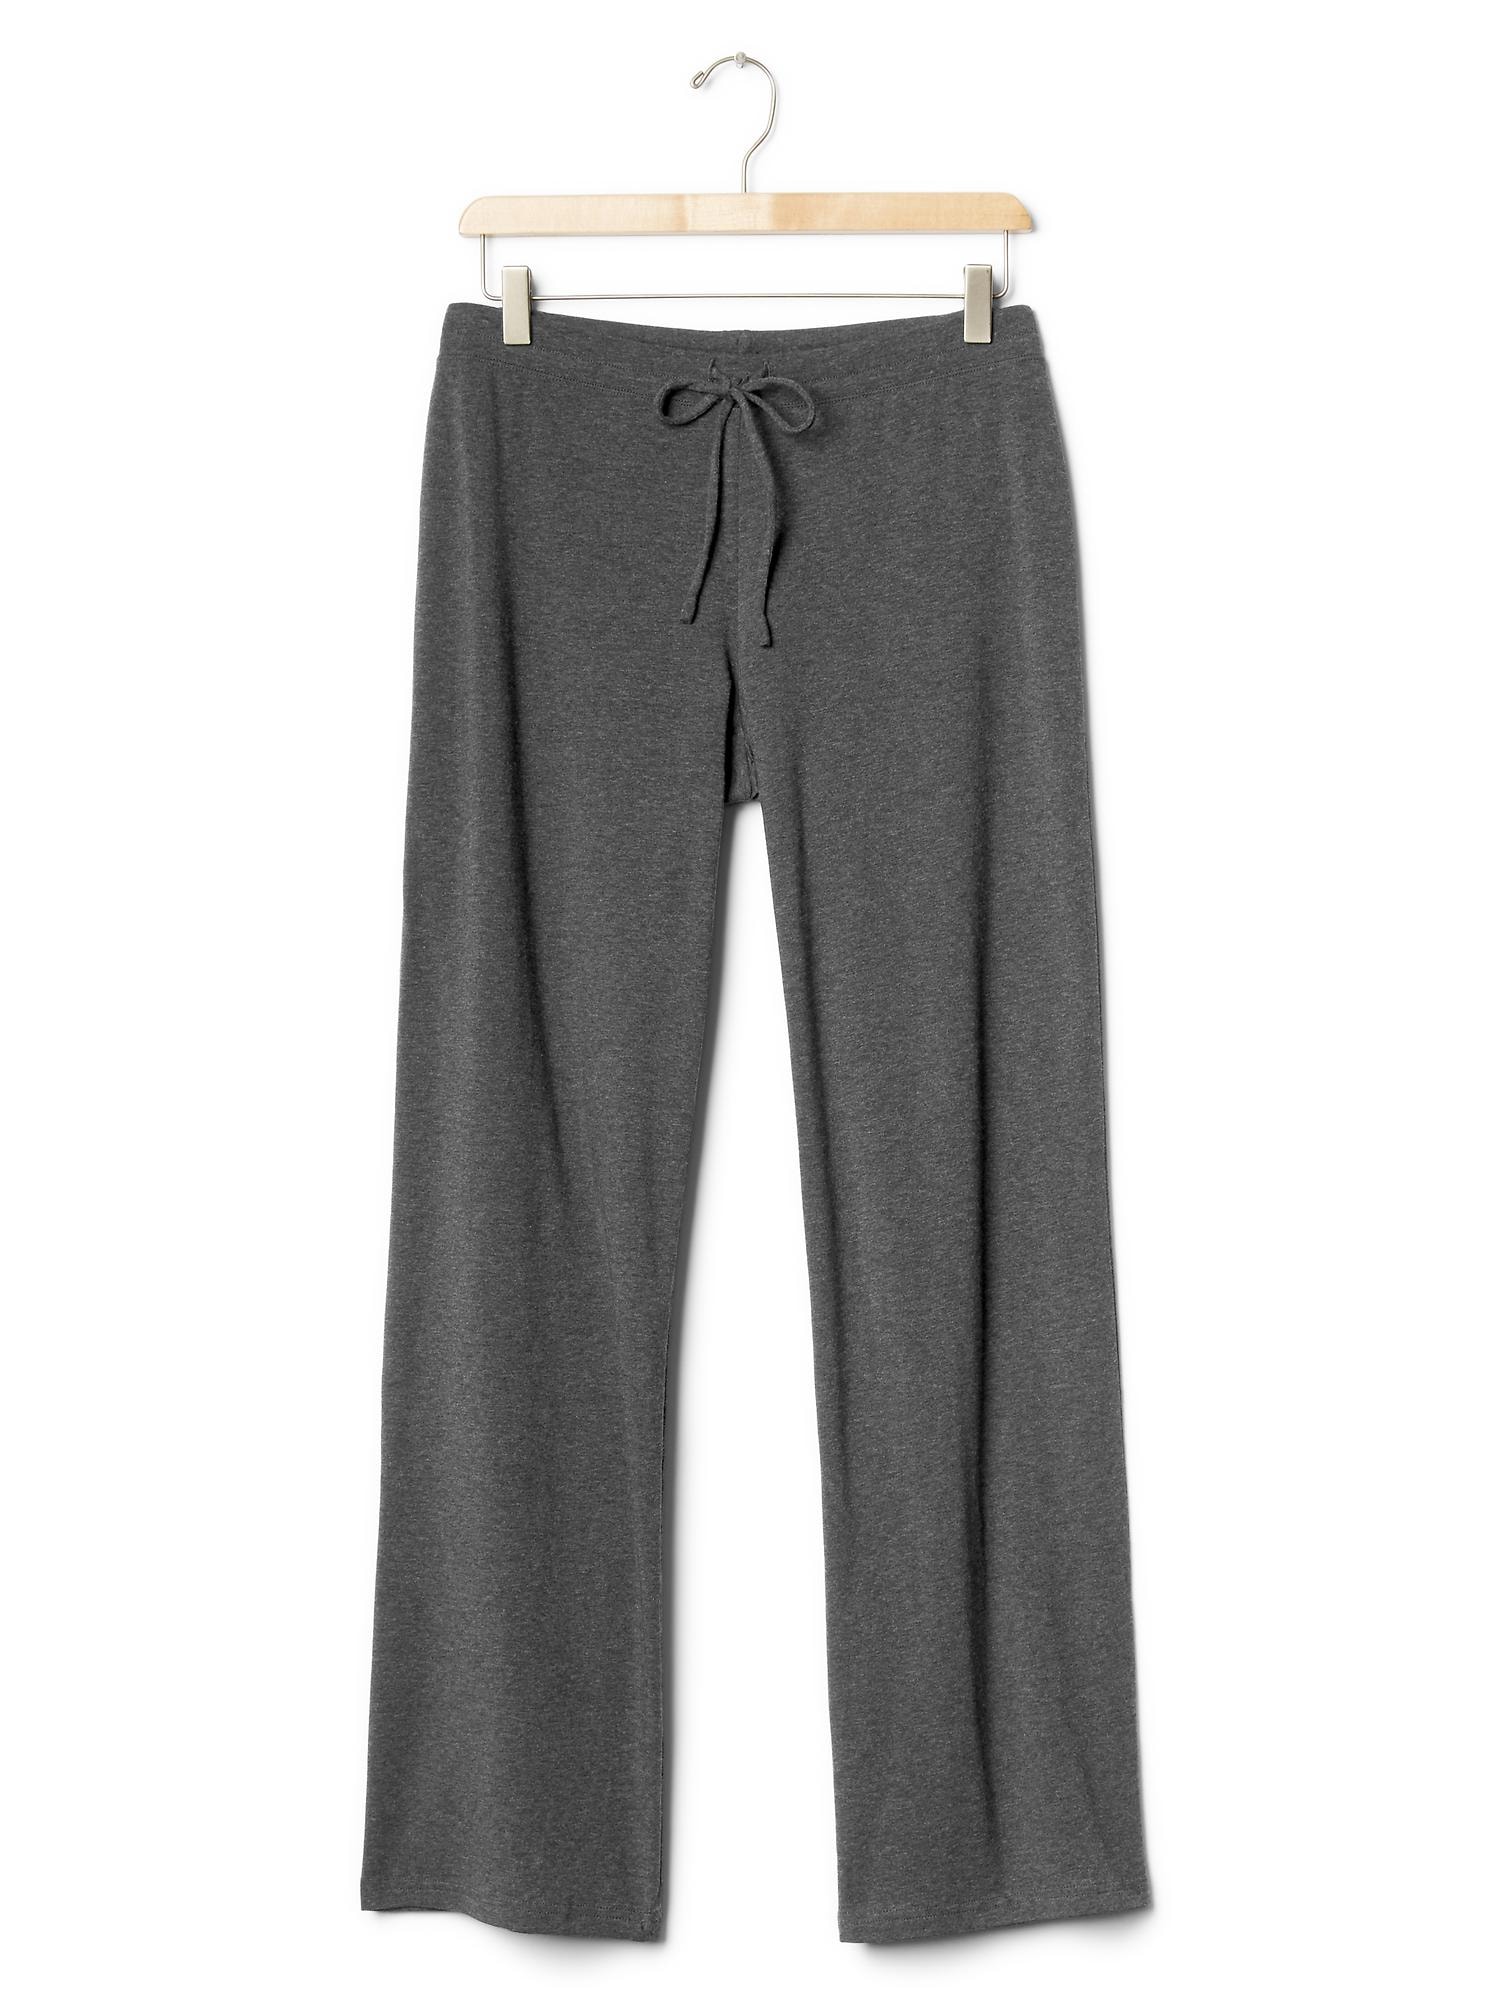 Woolbabe Relax! Lounge Pants, Adults